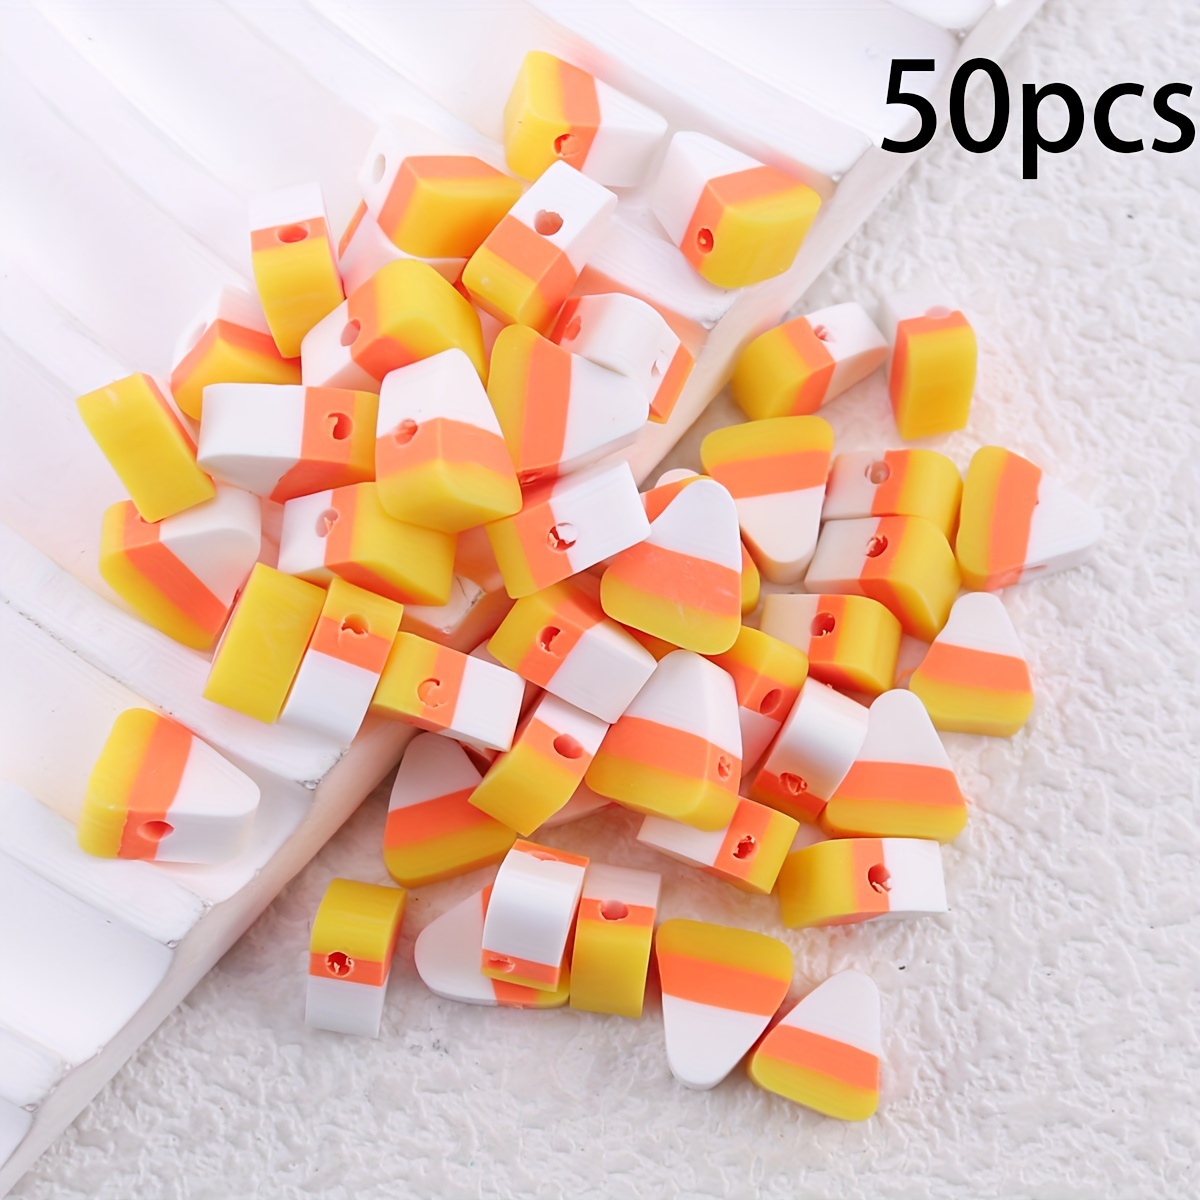 50pcs/box Mix Fruit Polymer Clay Beads Pineapple Peach Watermelon Avocado  Spacer Beads For Jewelry Making DIY Bracelet Necklace